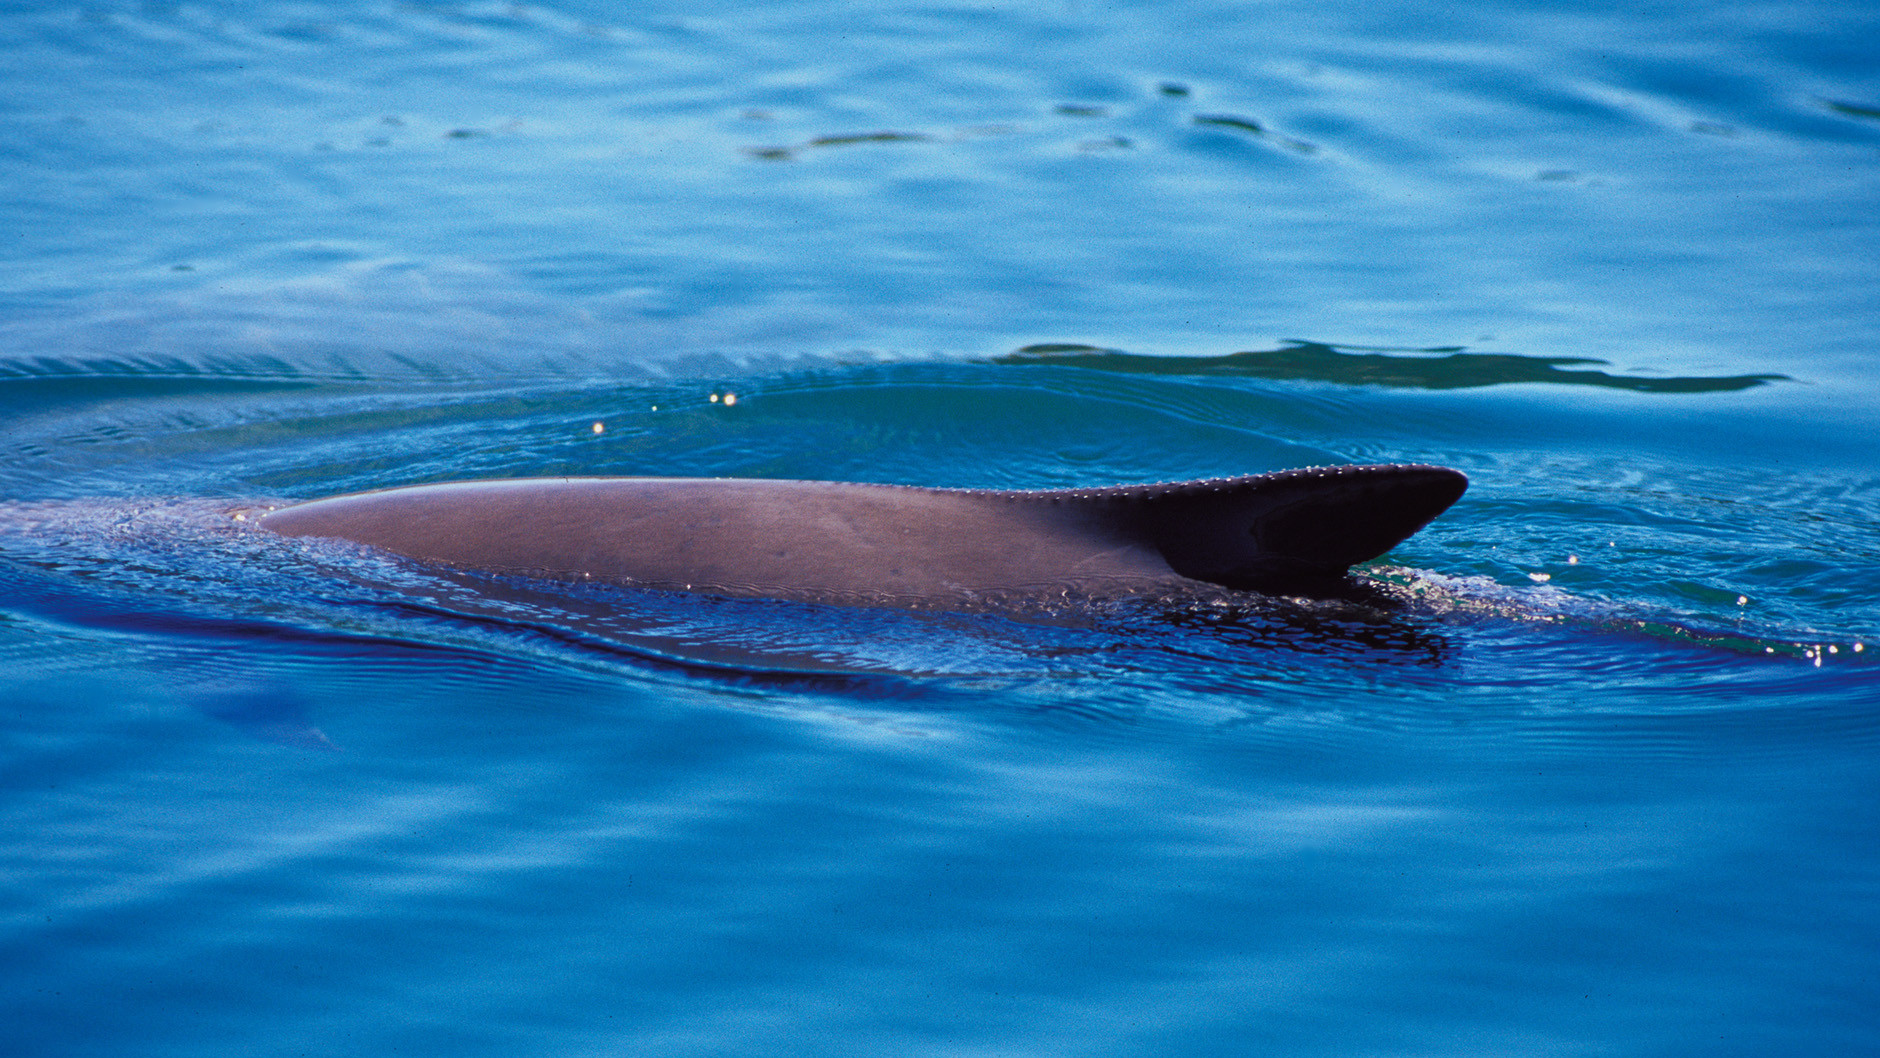 A close-up of a Burmeister's porpoise on the surface